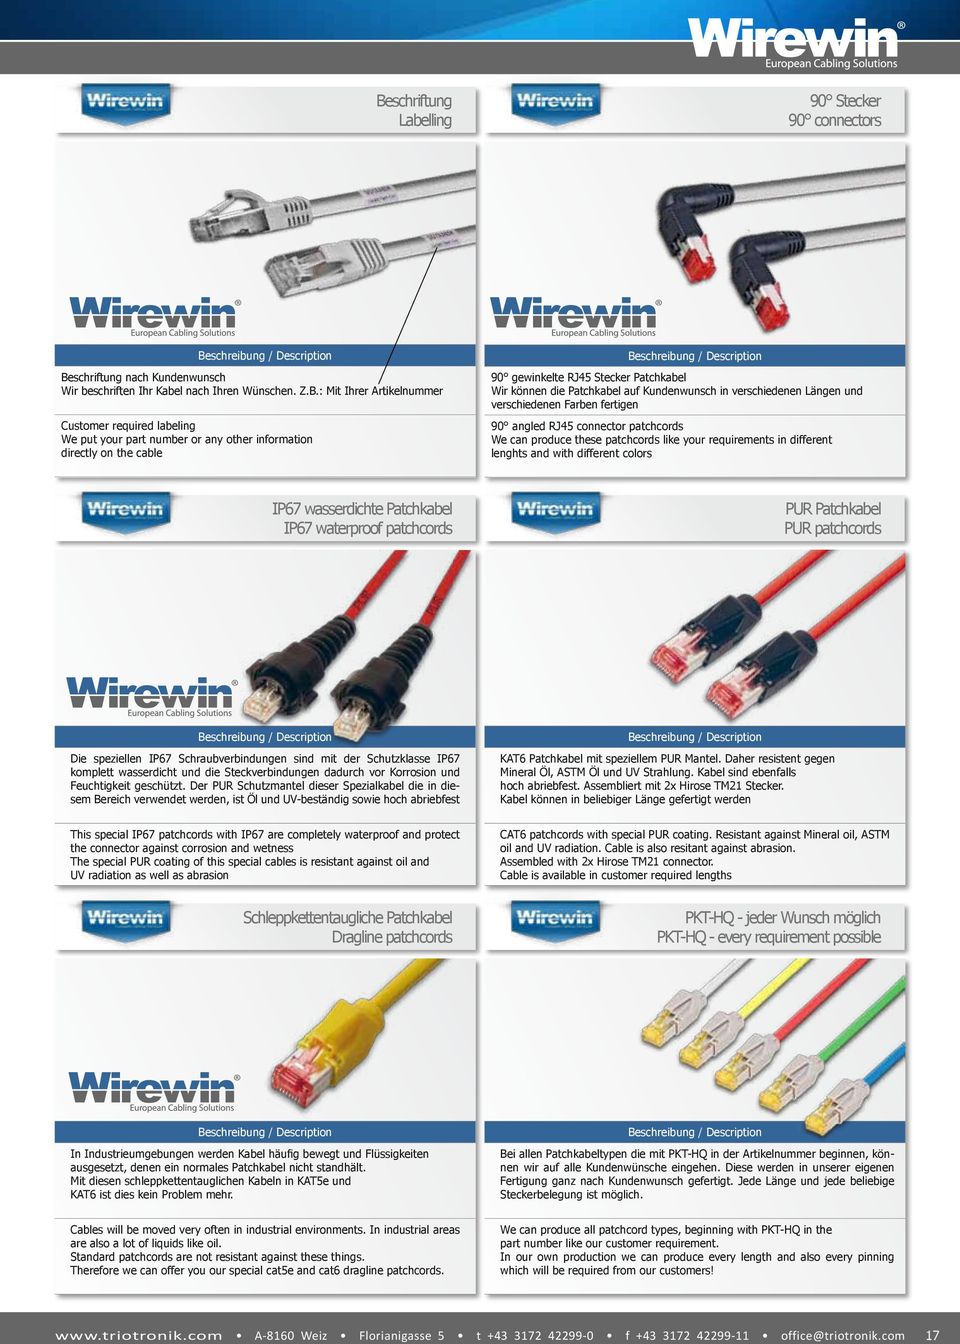 angled RJ45 connector patchcords We can produce these patchcords like your requirements in different lenghts and with different colors IP67 wasserdichte Patchkabel IP67 waterproof patchcords PUR